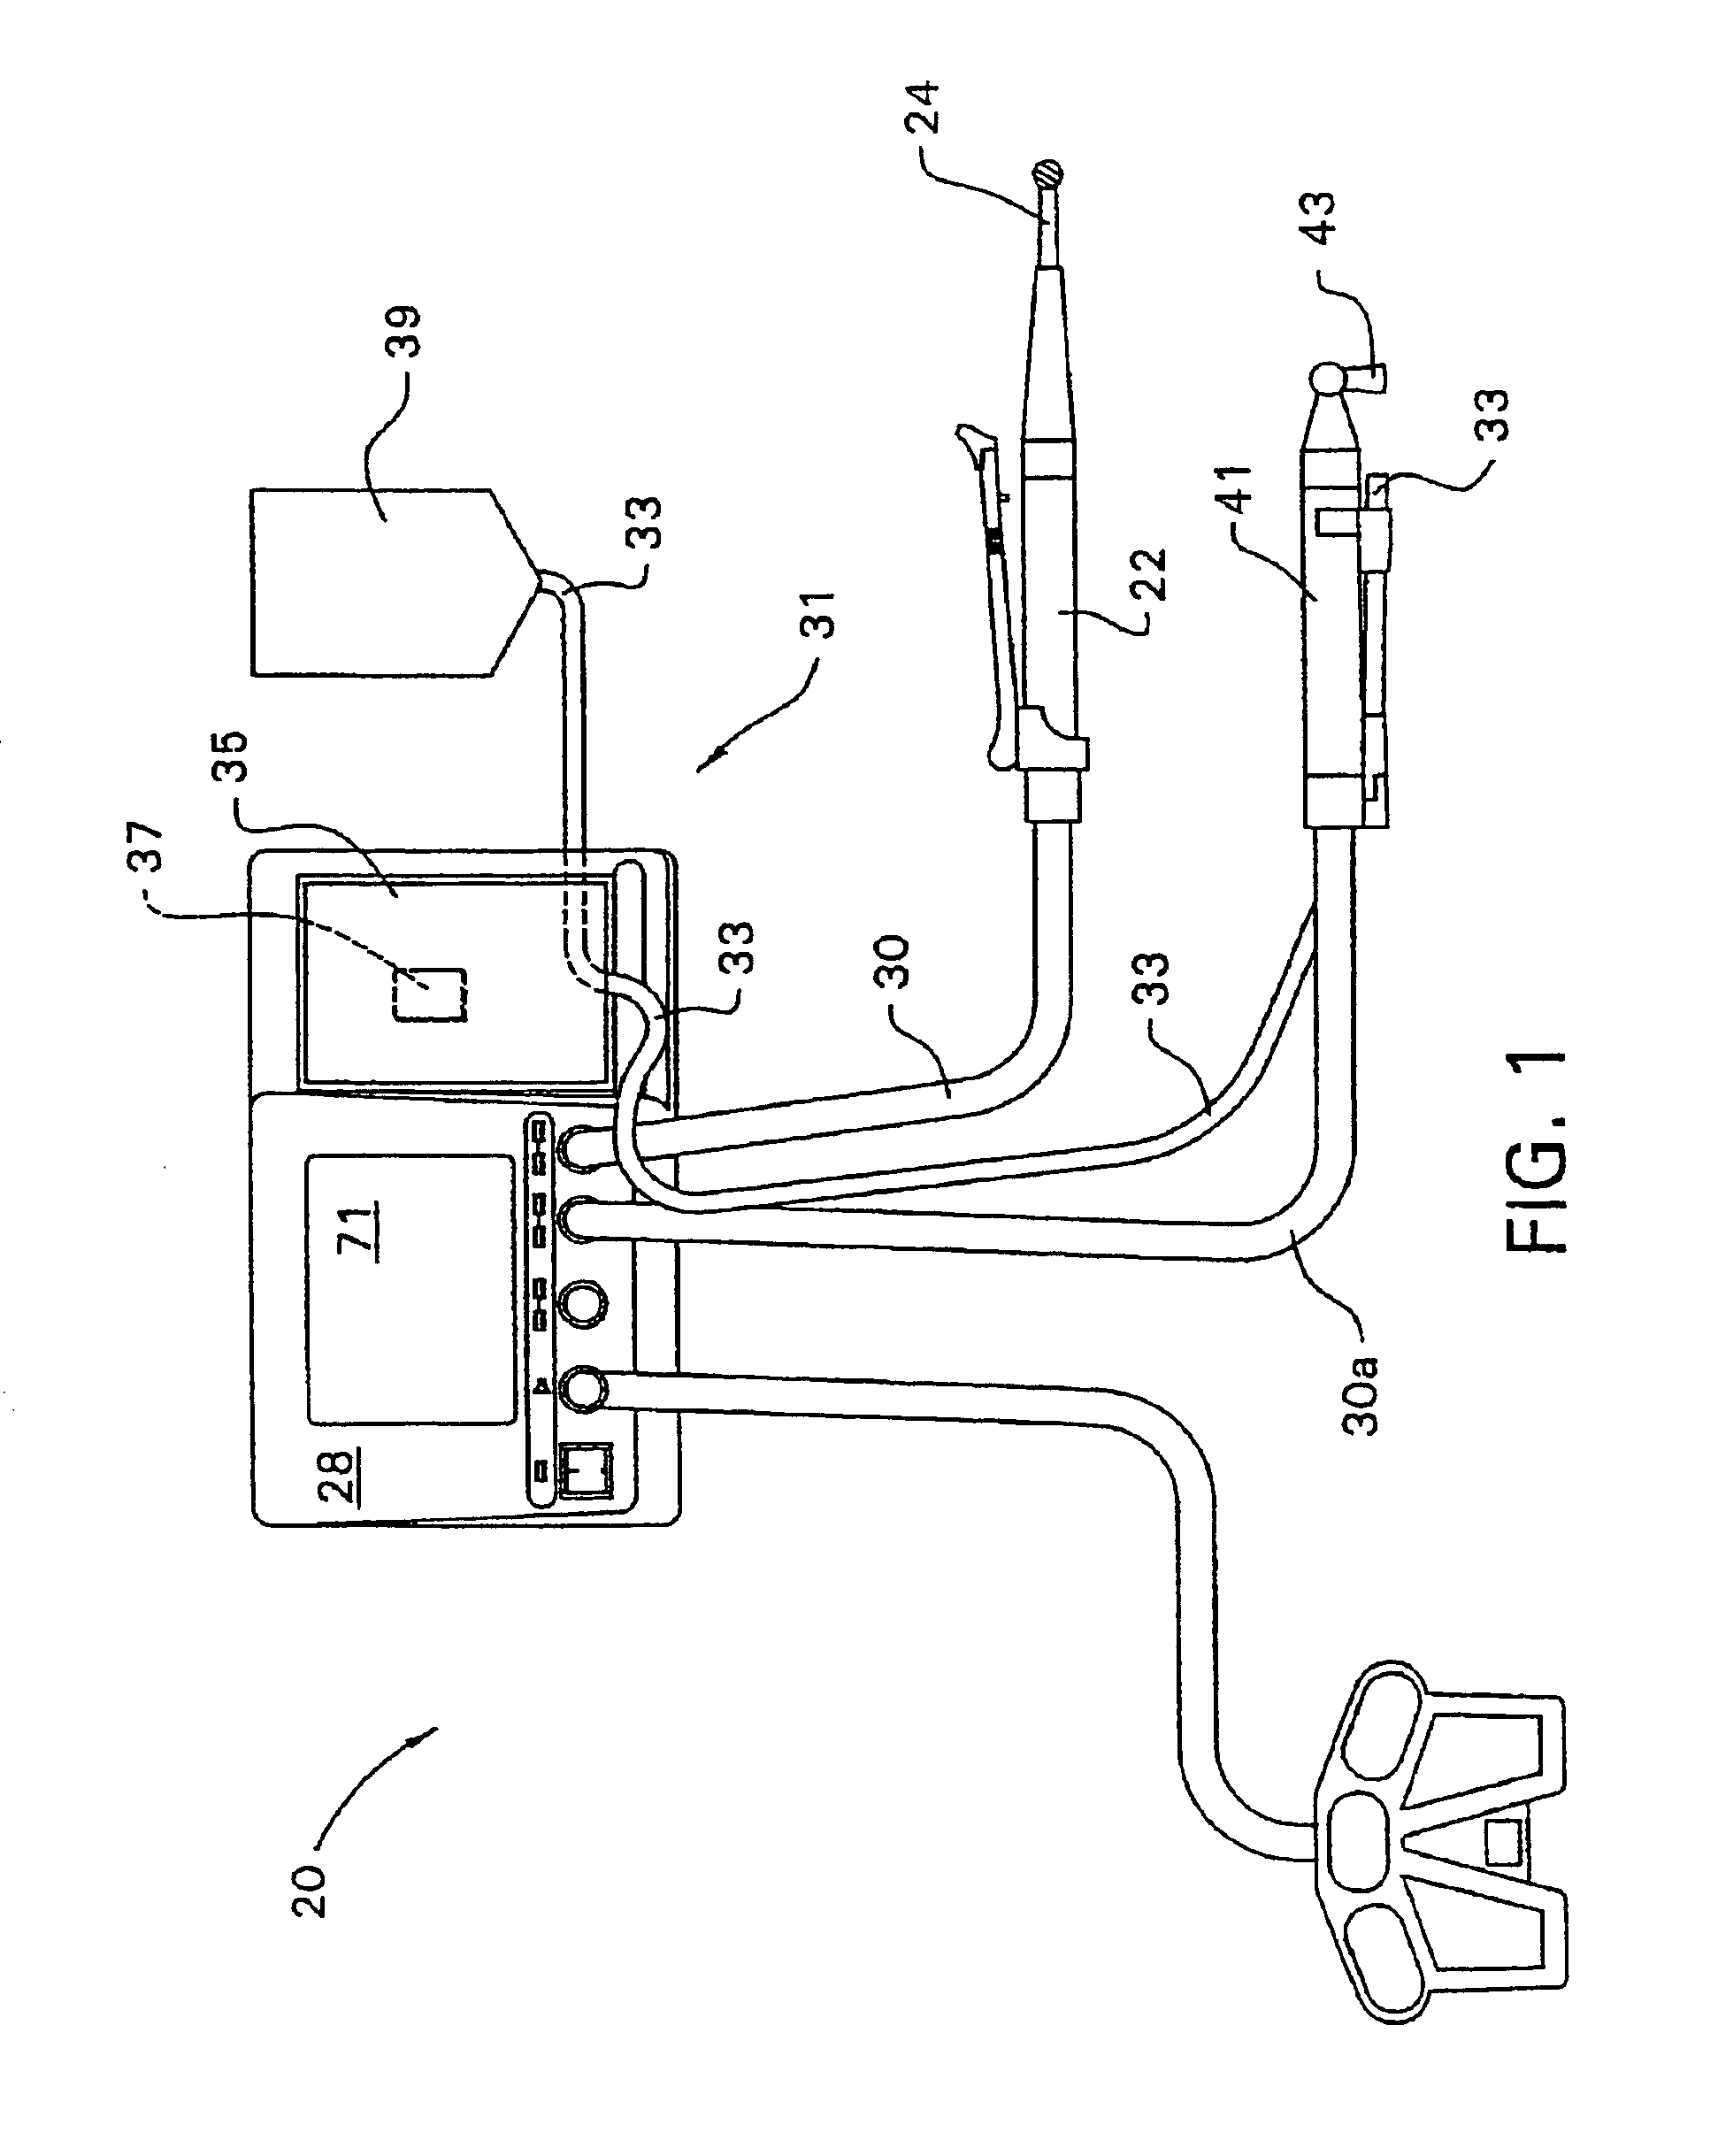 Method for assembling, identifying and controlling a powered surgical tool assembly assembled from multiple components